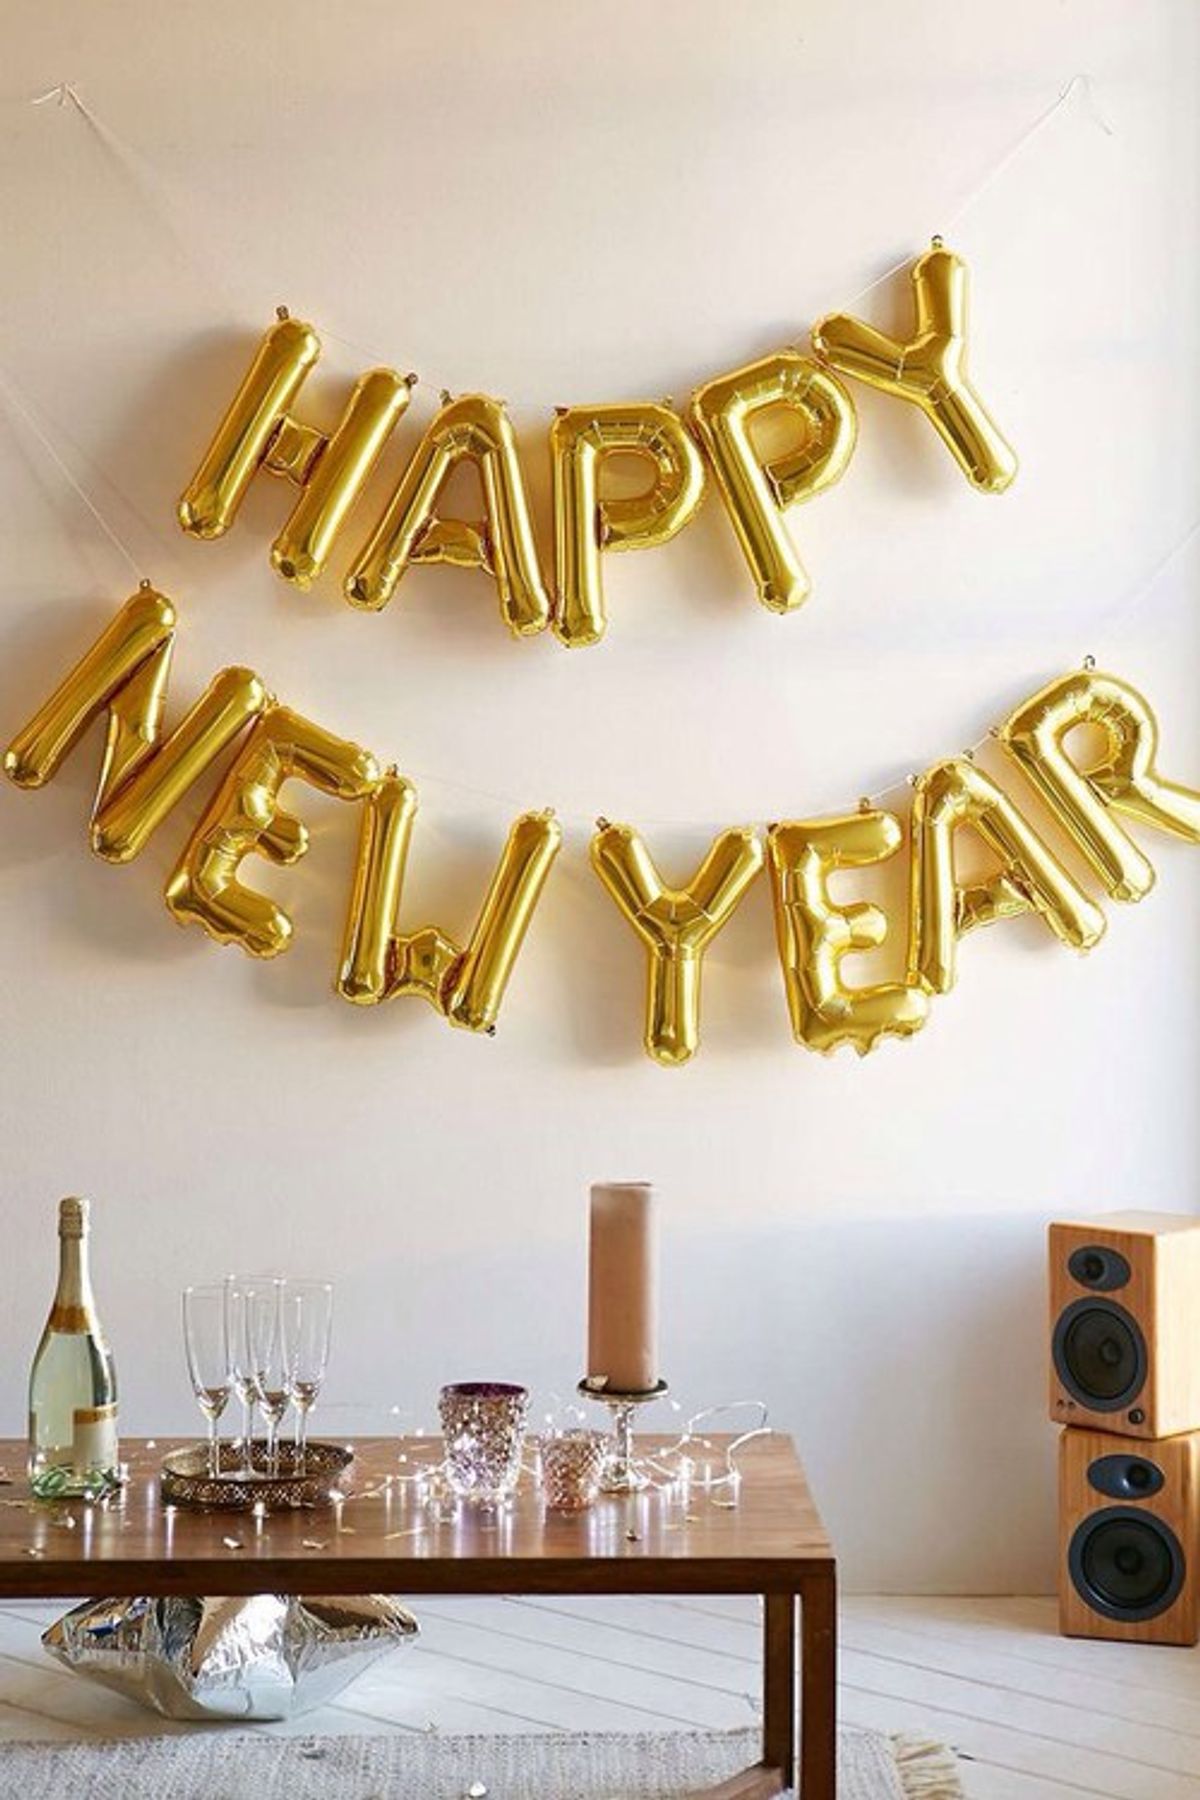 10 Reasons Why New Years Eve Is The Best Night Of The Year